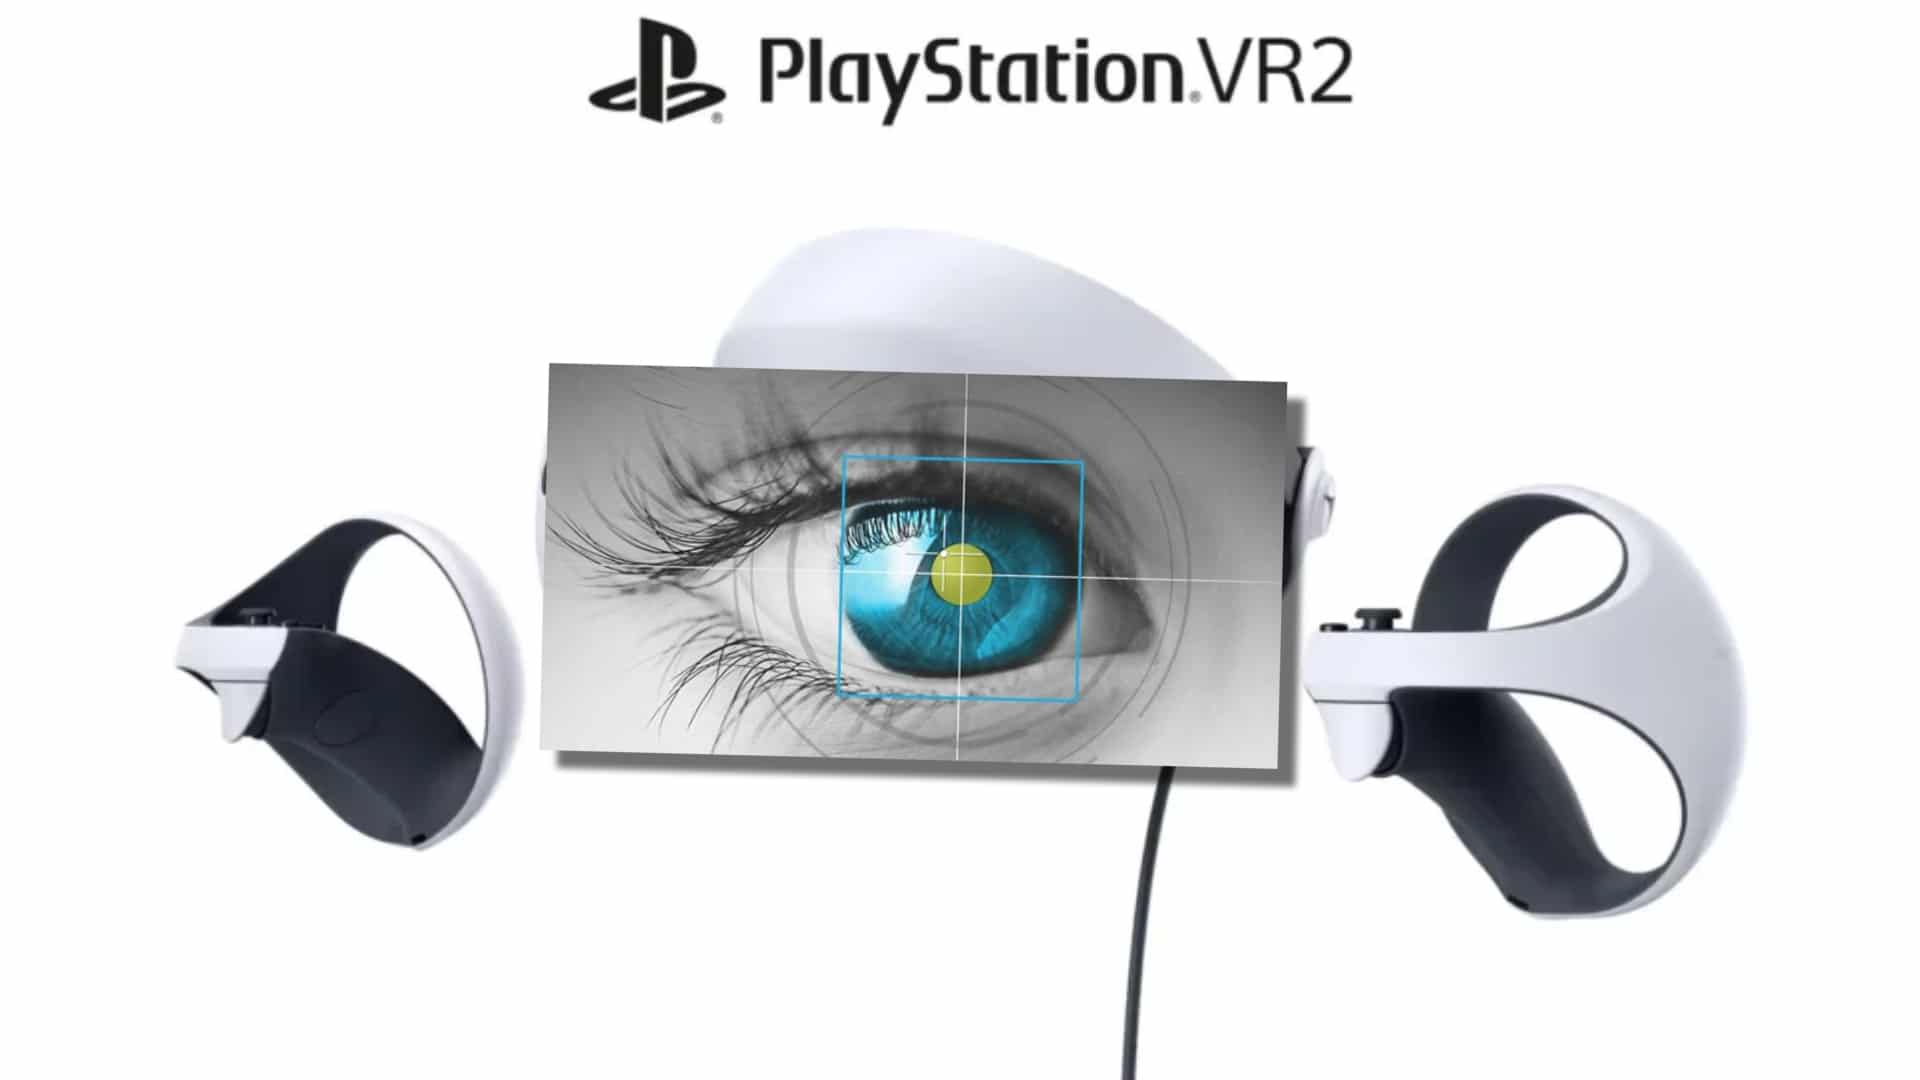 eye-tracking-firm-confirms-sony-has-licensed-its-tech-for-psvr2-GamersRD